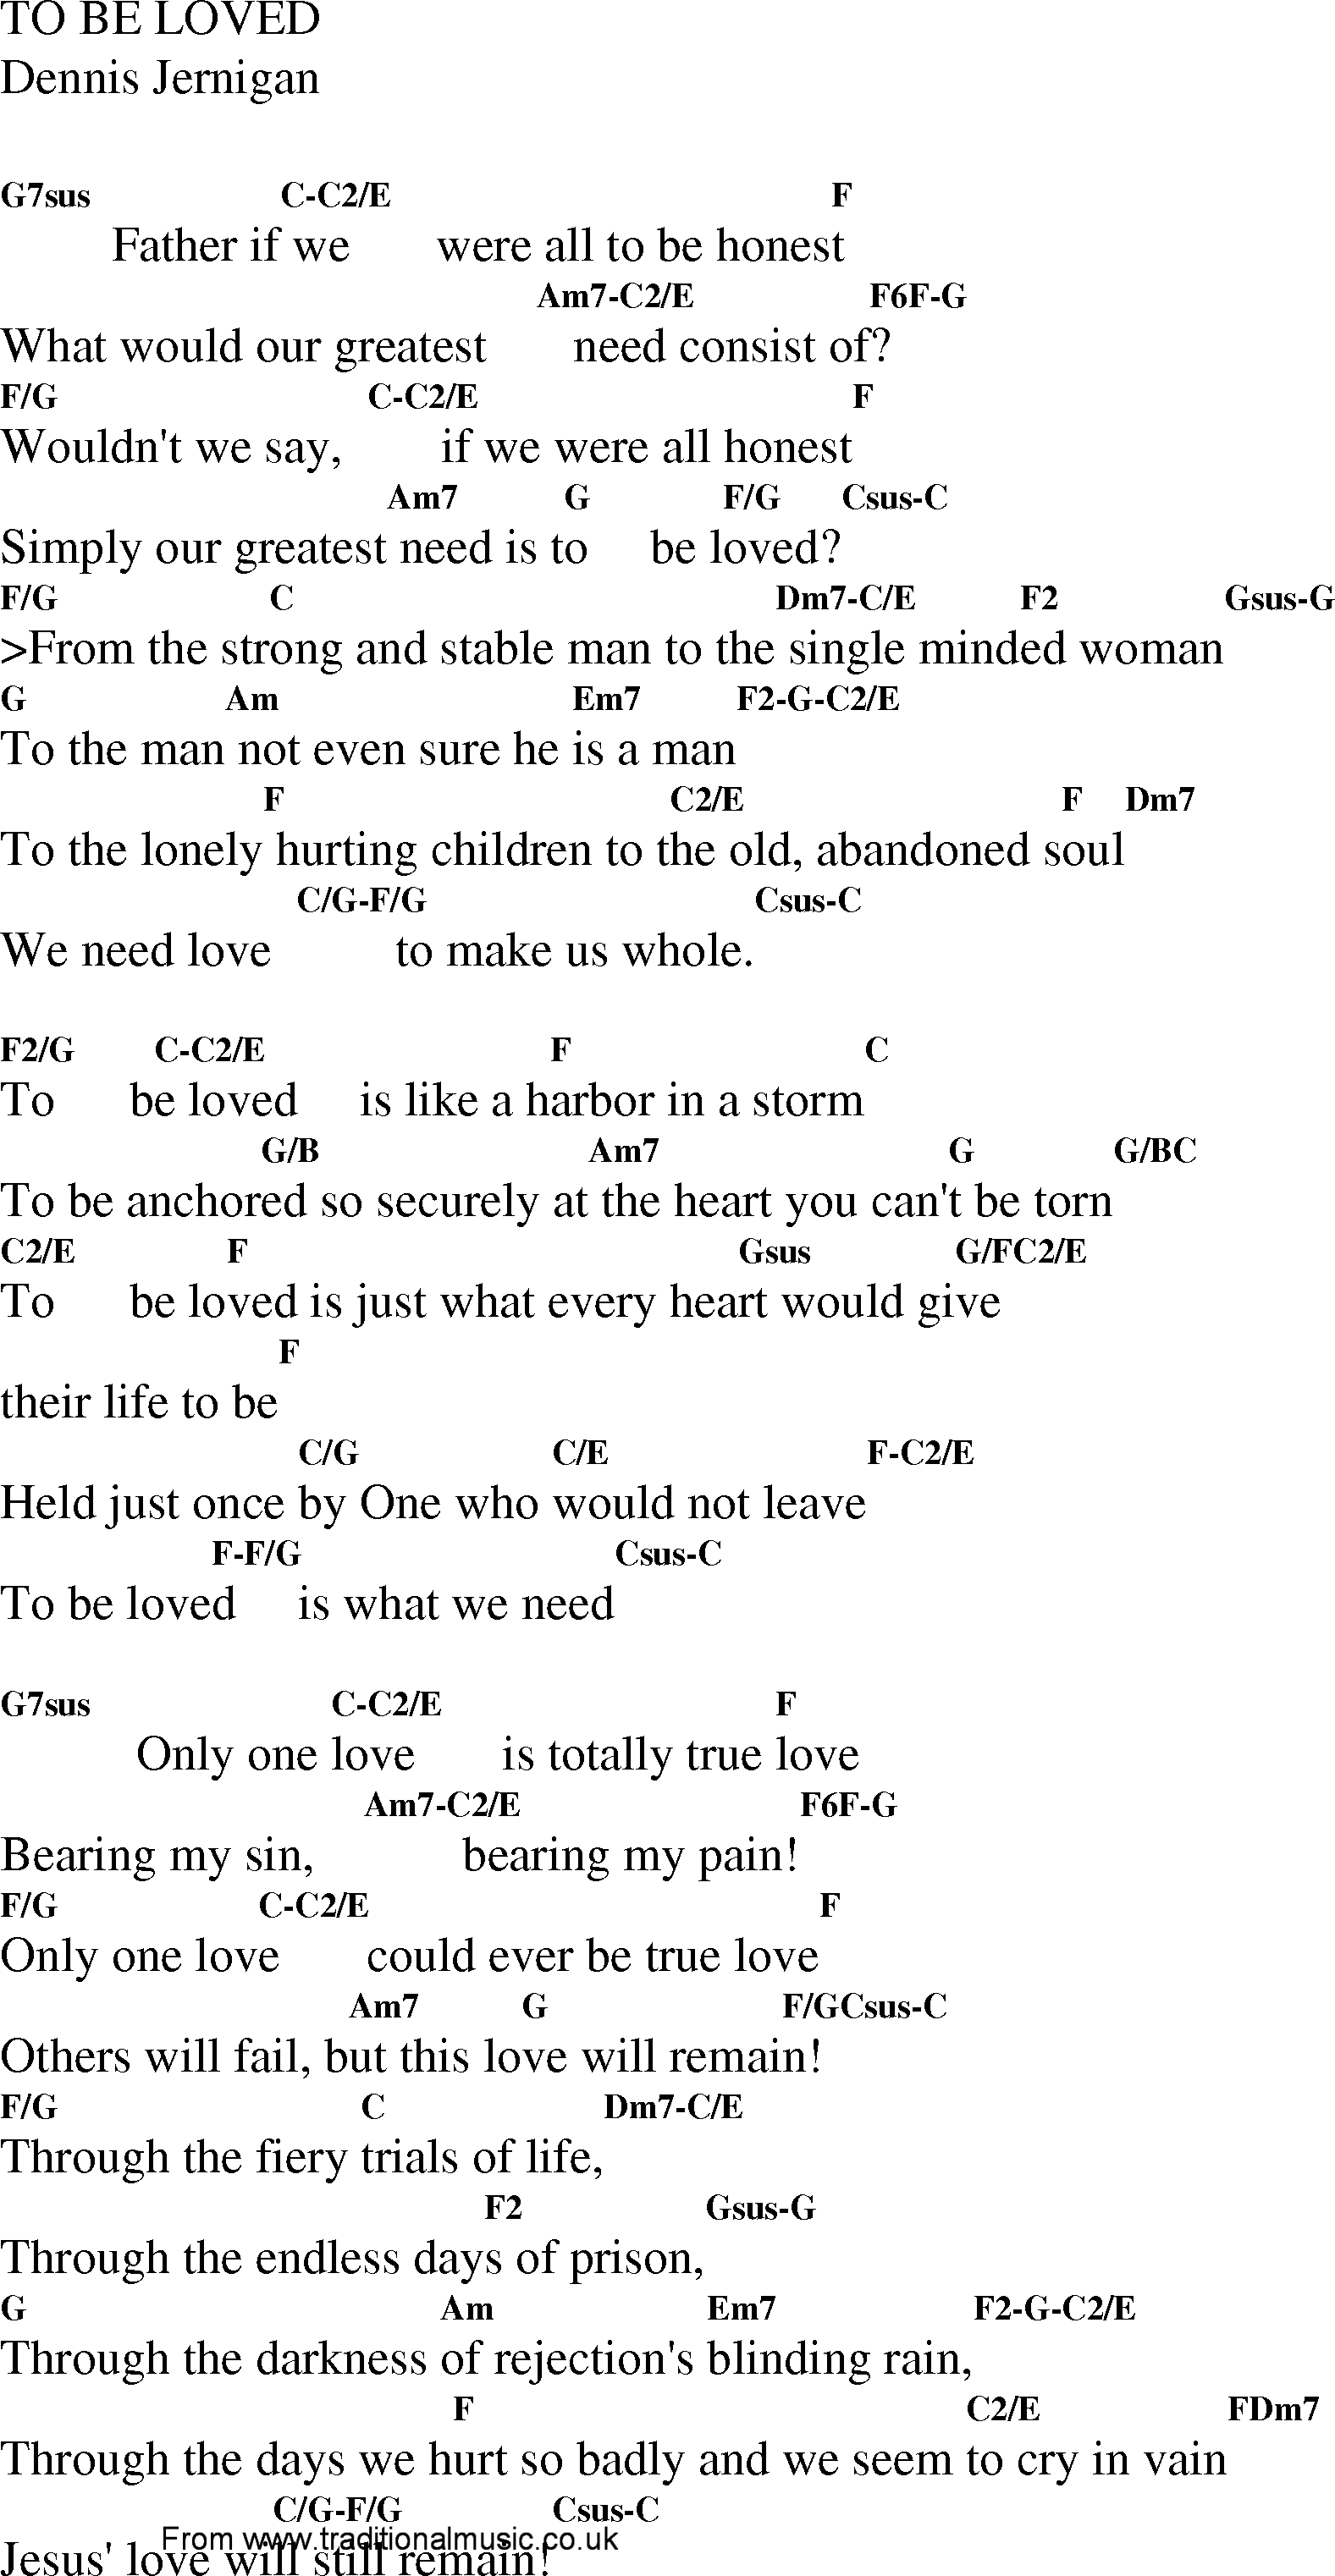 Gospel Song: to_be_loved, lyrics and chords.